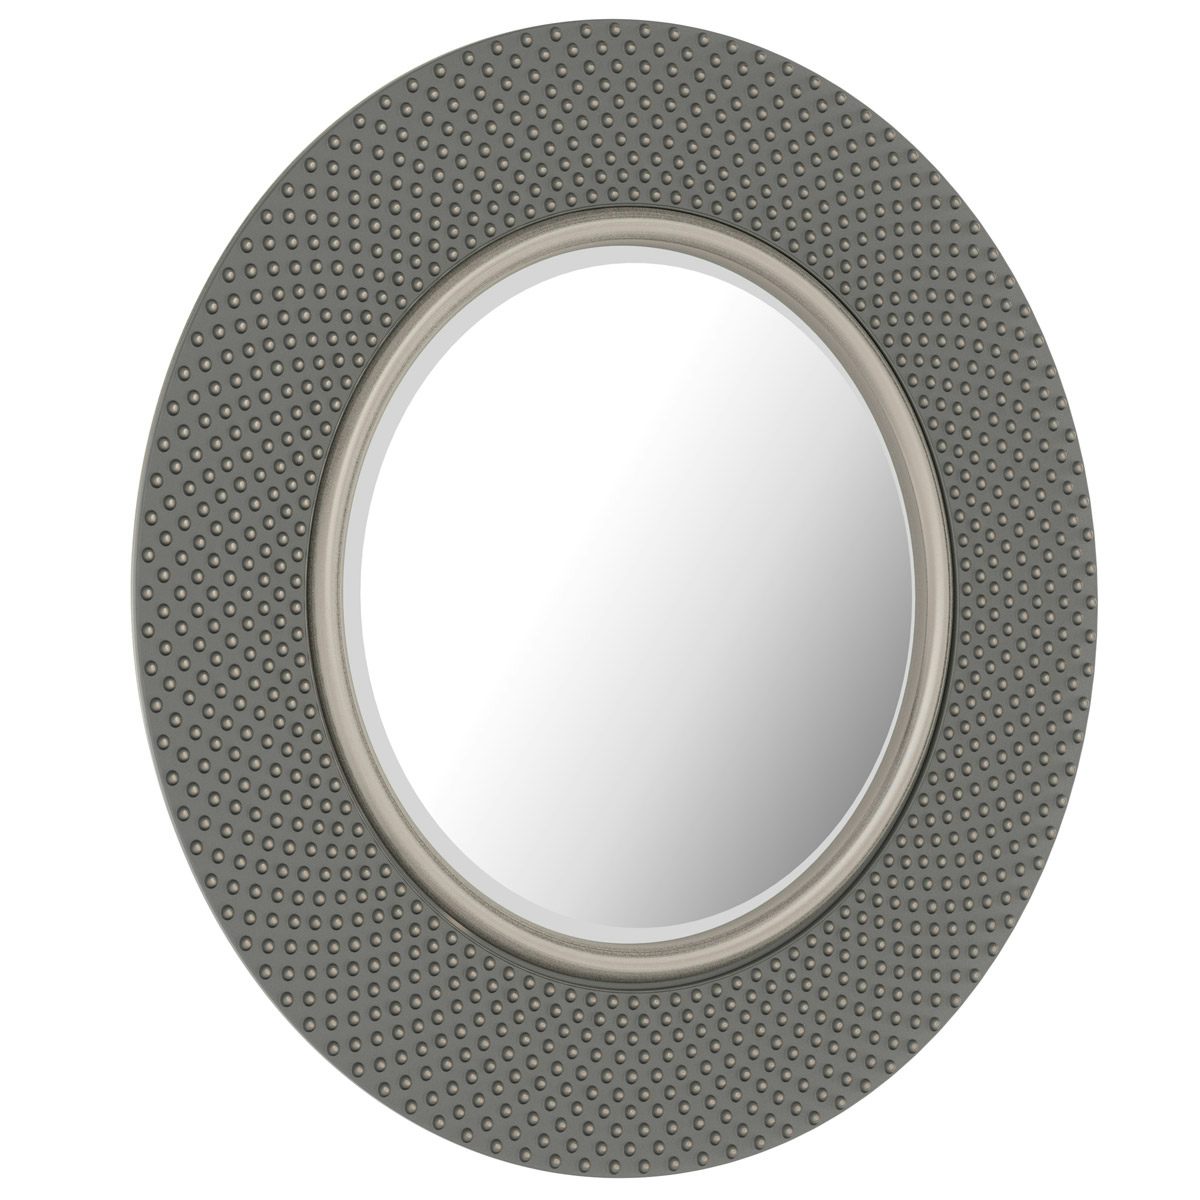 Accents Hammered silver mirror